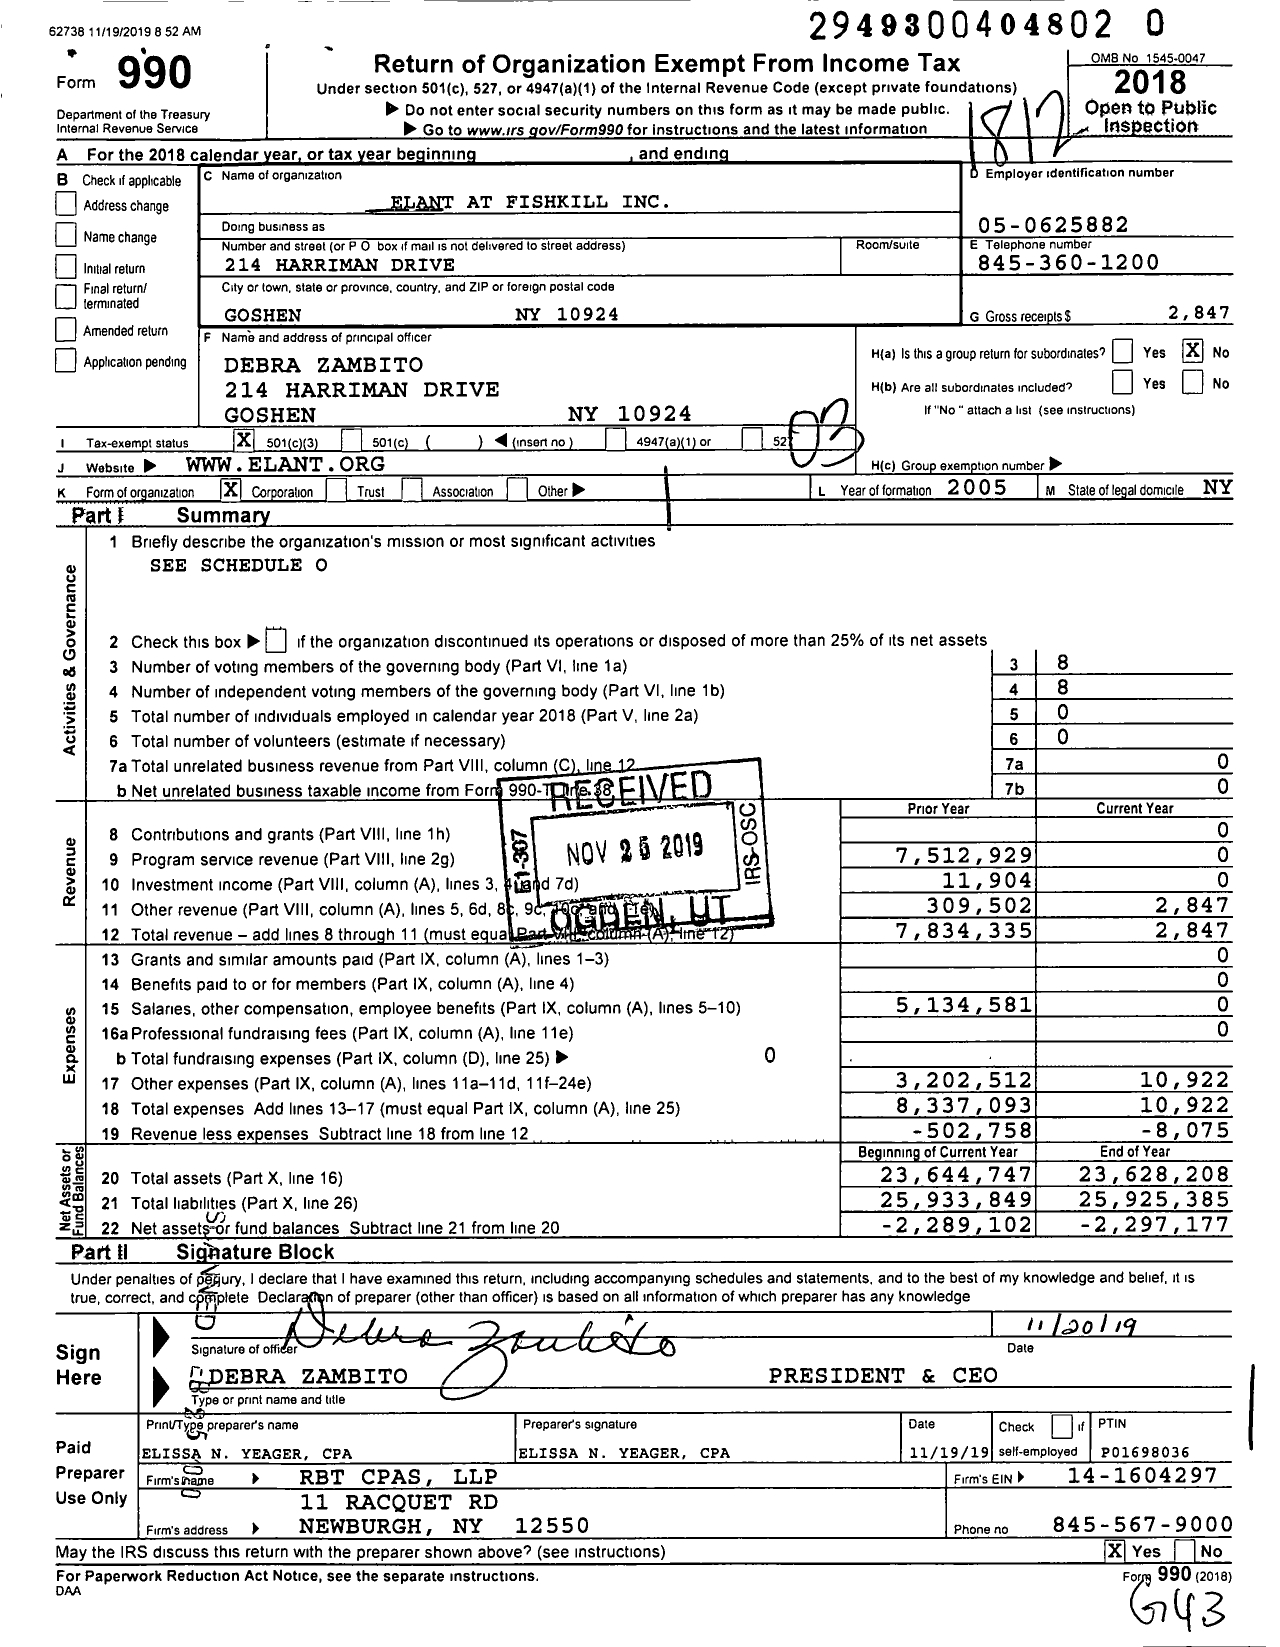 Image of first page of 2018 Form 990 for Elant